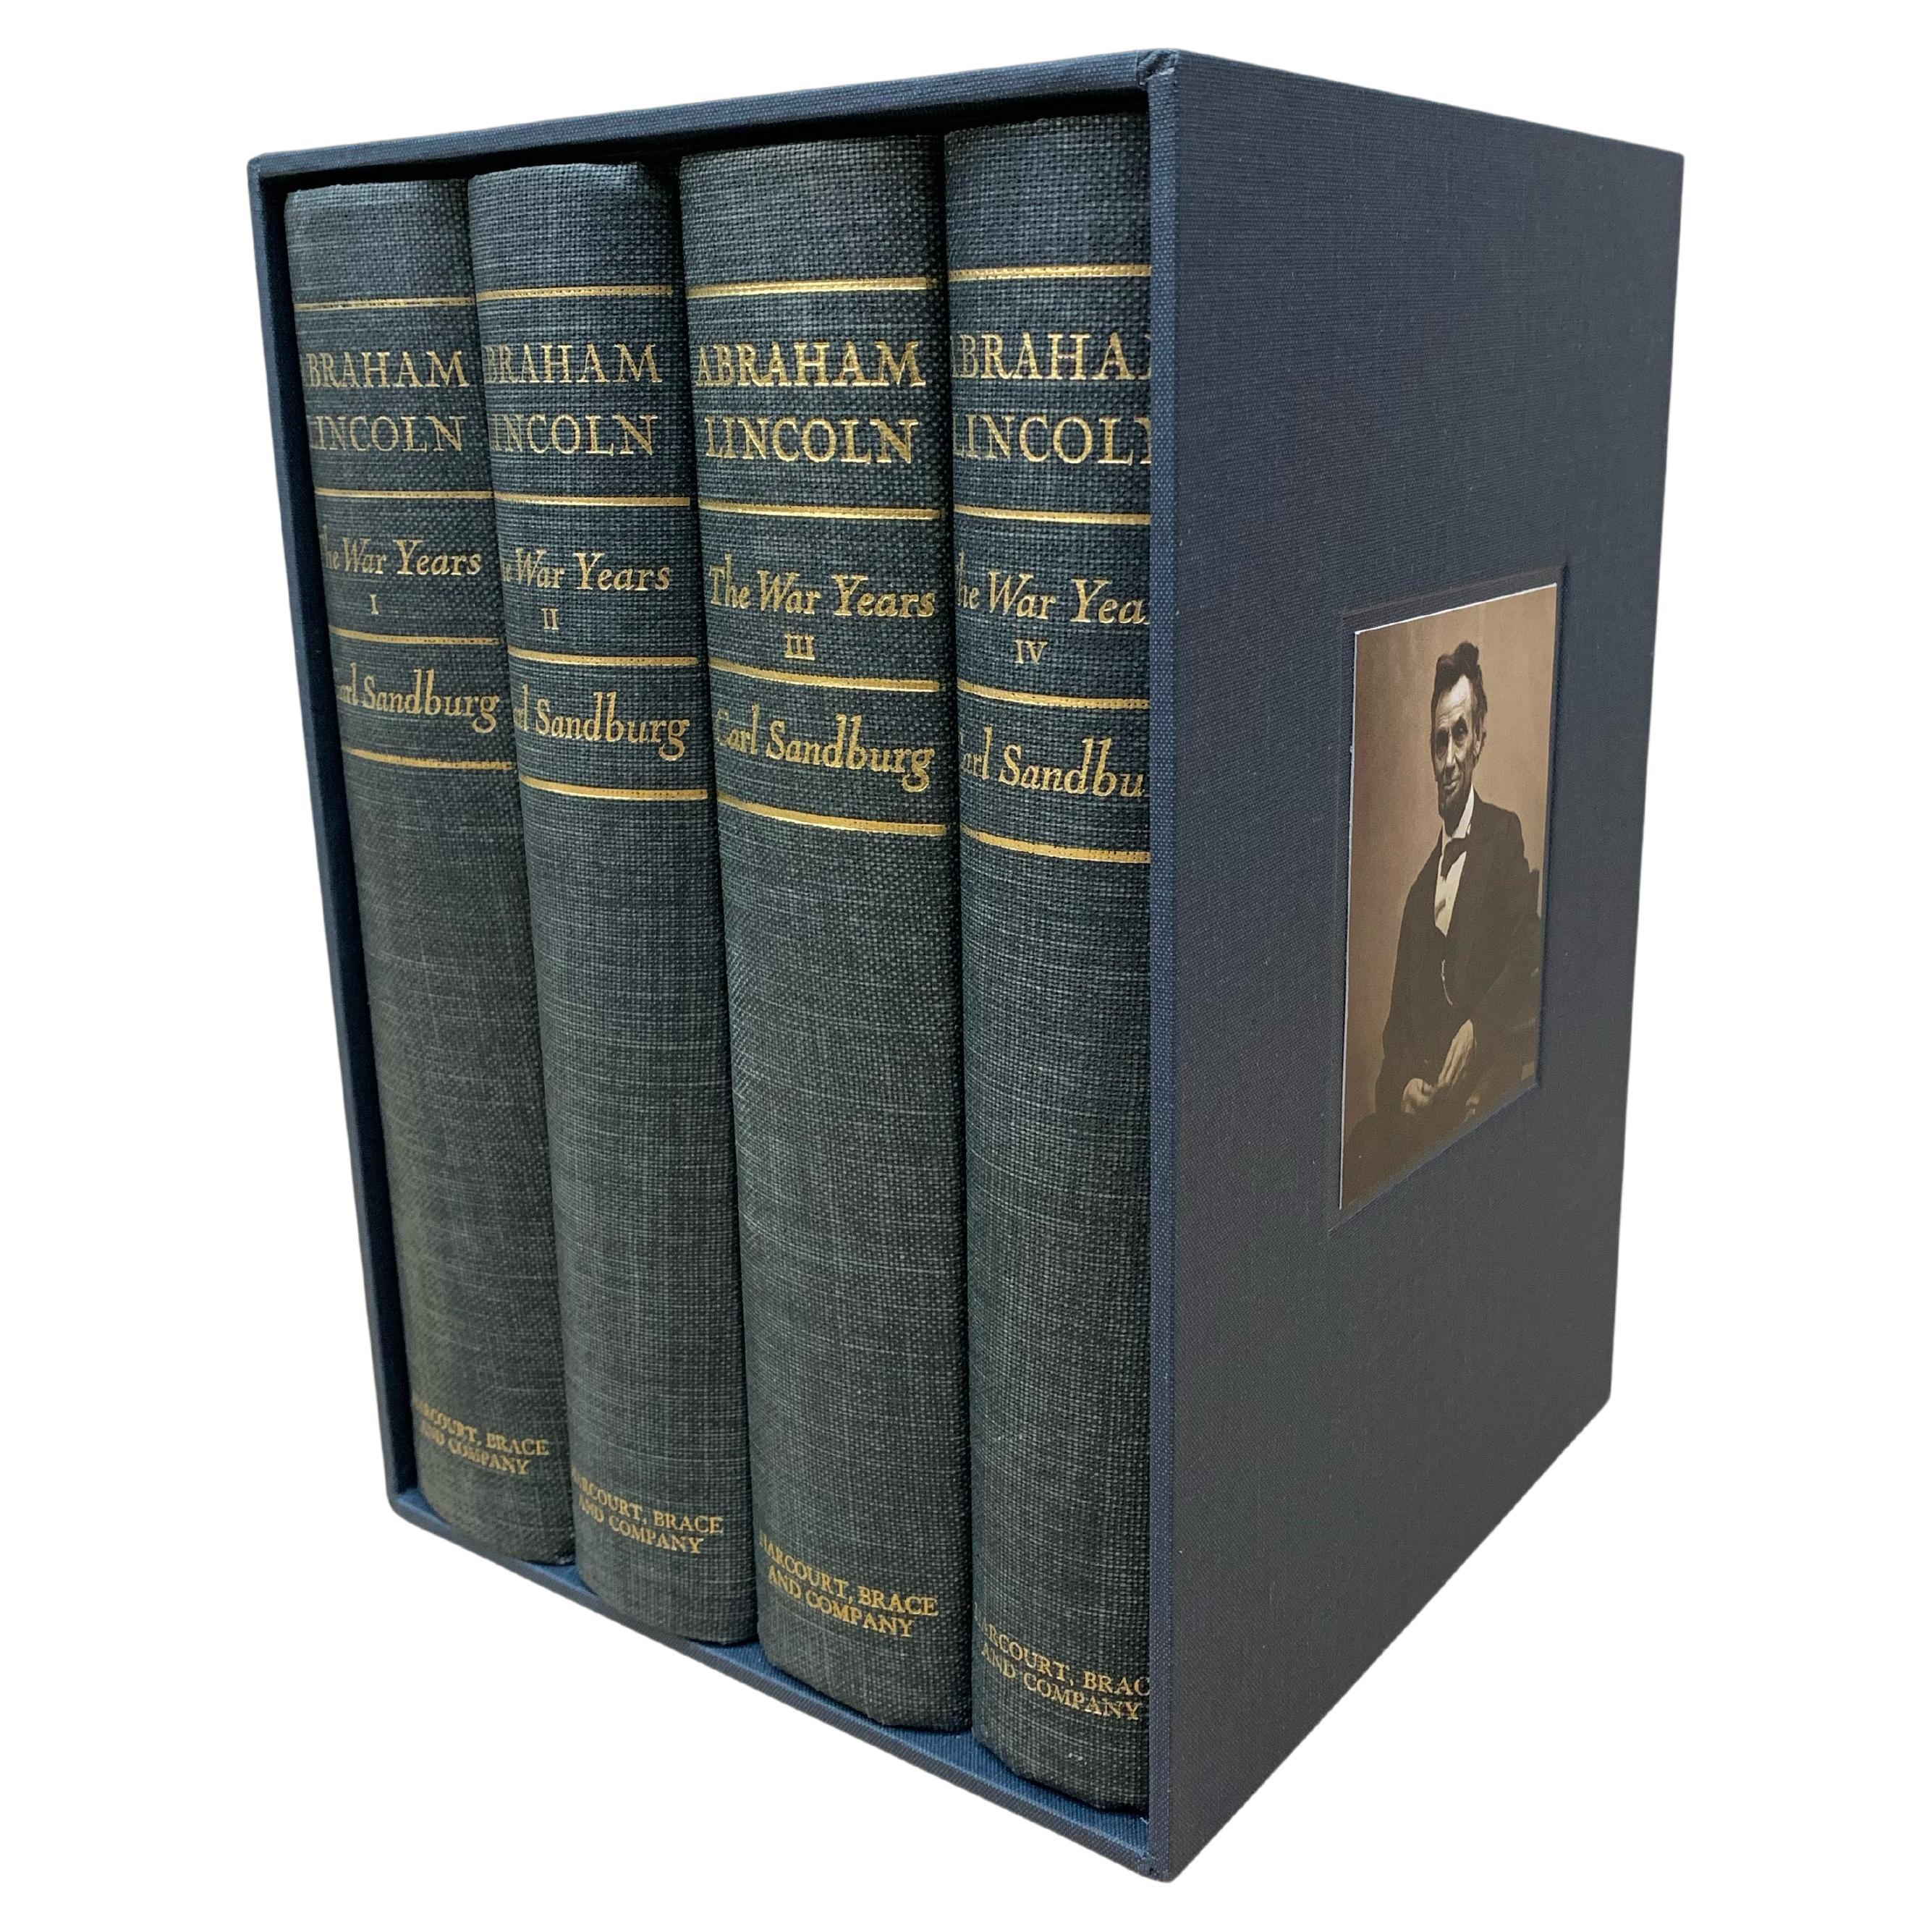 Sandburg, Carl (1878-1967). Abraham Lincoln: The War Years. New York: Harcourt, Brace & Company, 1939. 4 volumes, 8vo. Illustrated. Original publisher's blue cloth with gilt titles to spines, top edges stained yellow. With a new custom lined